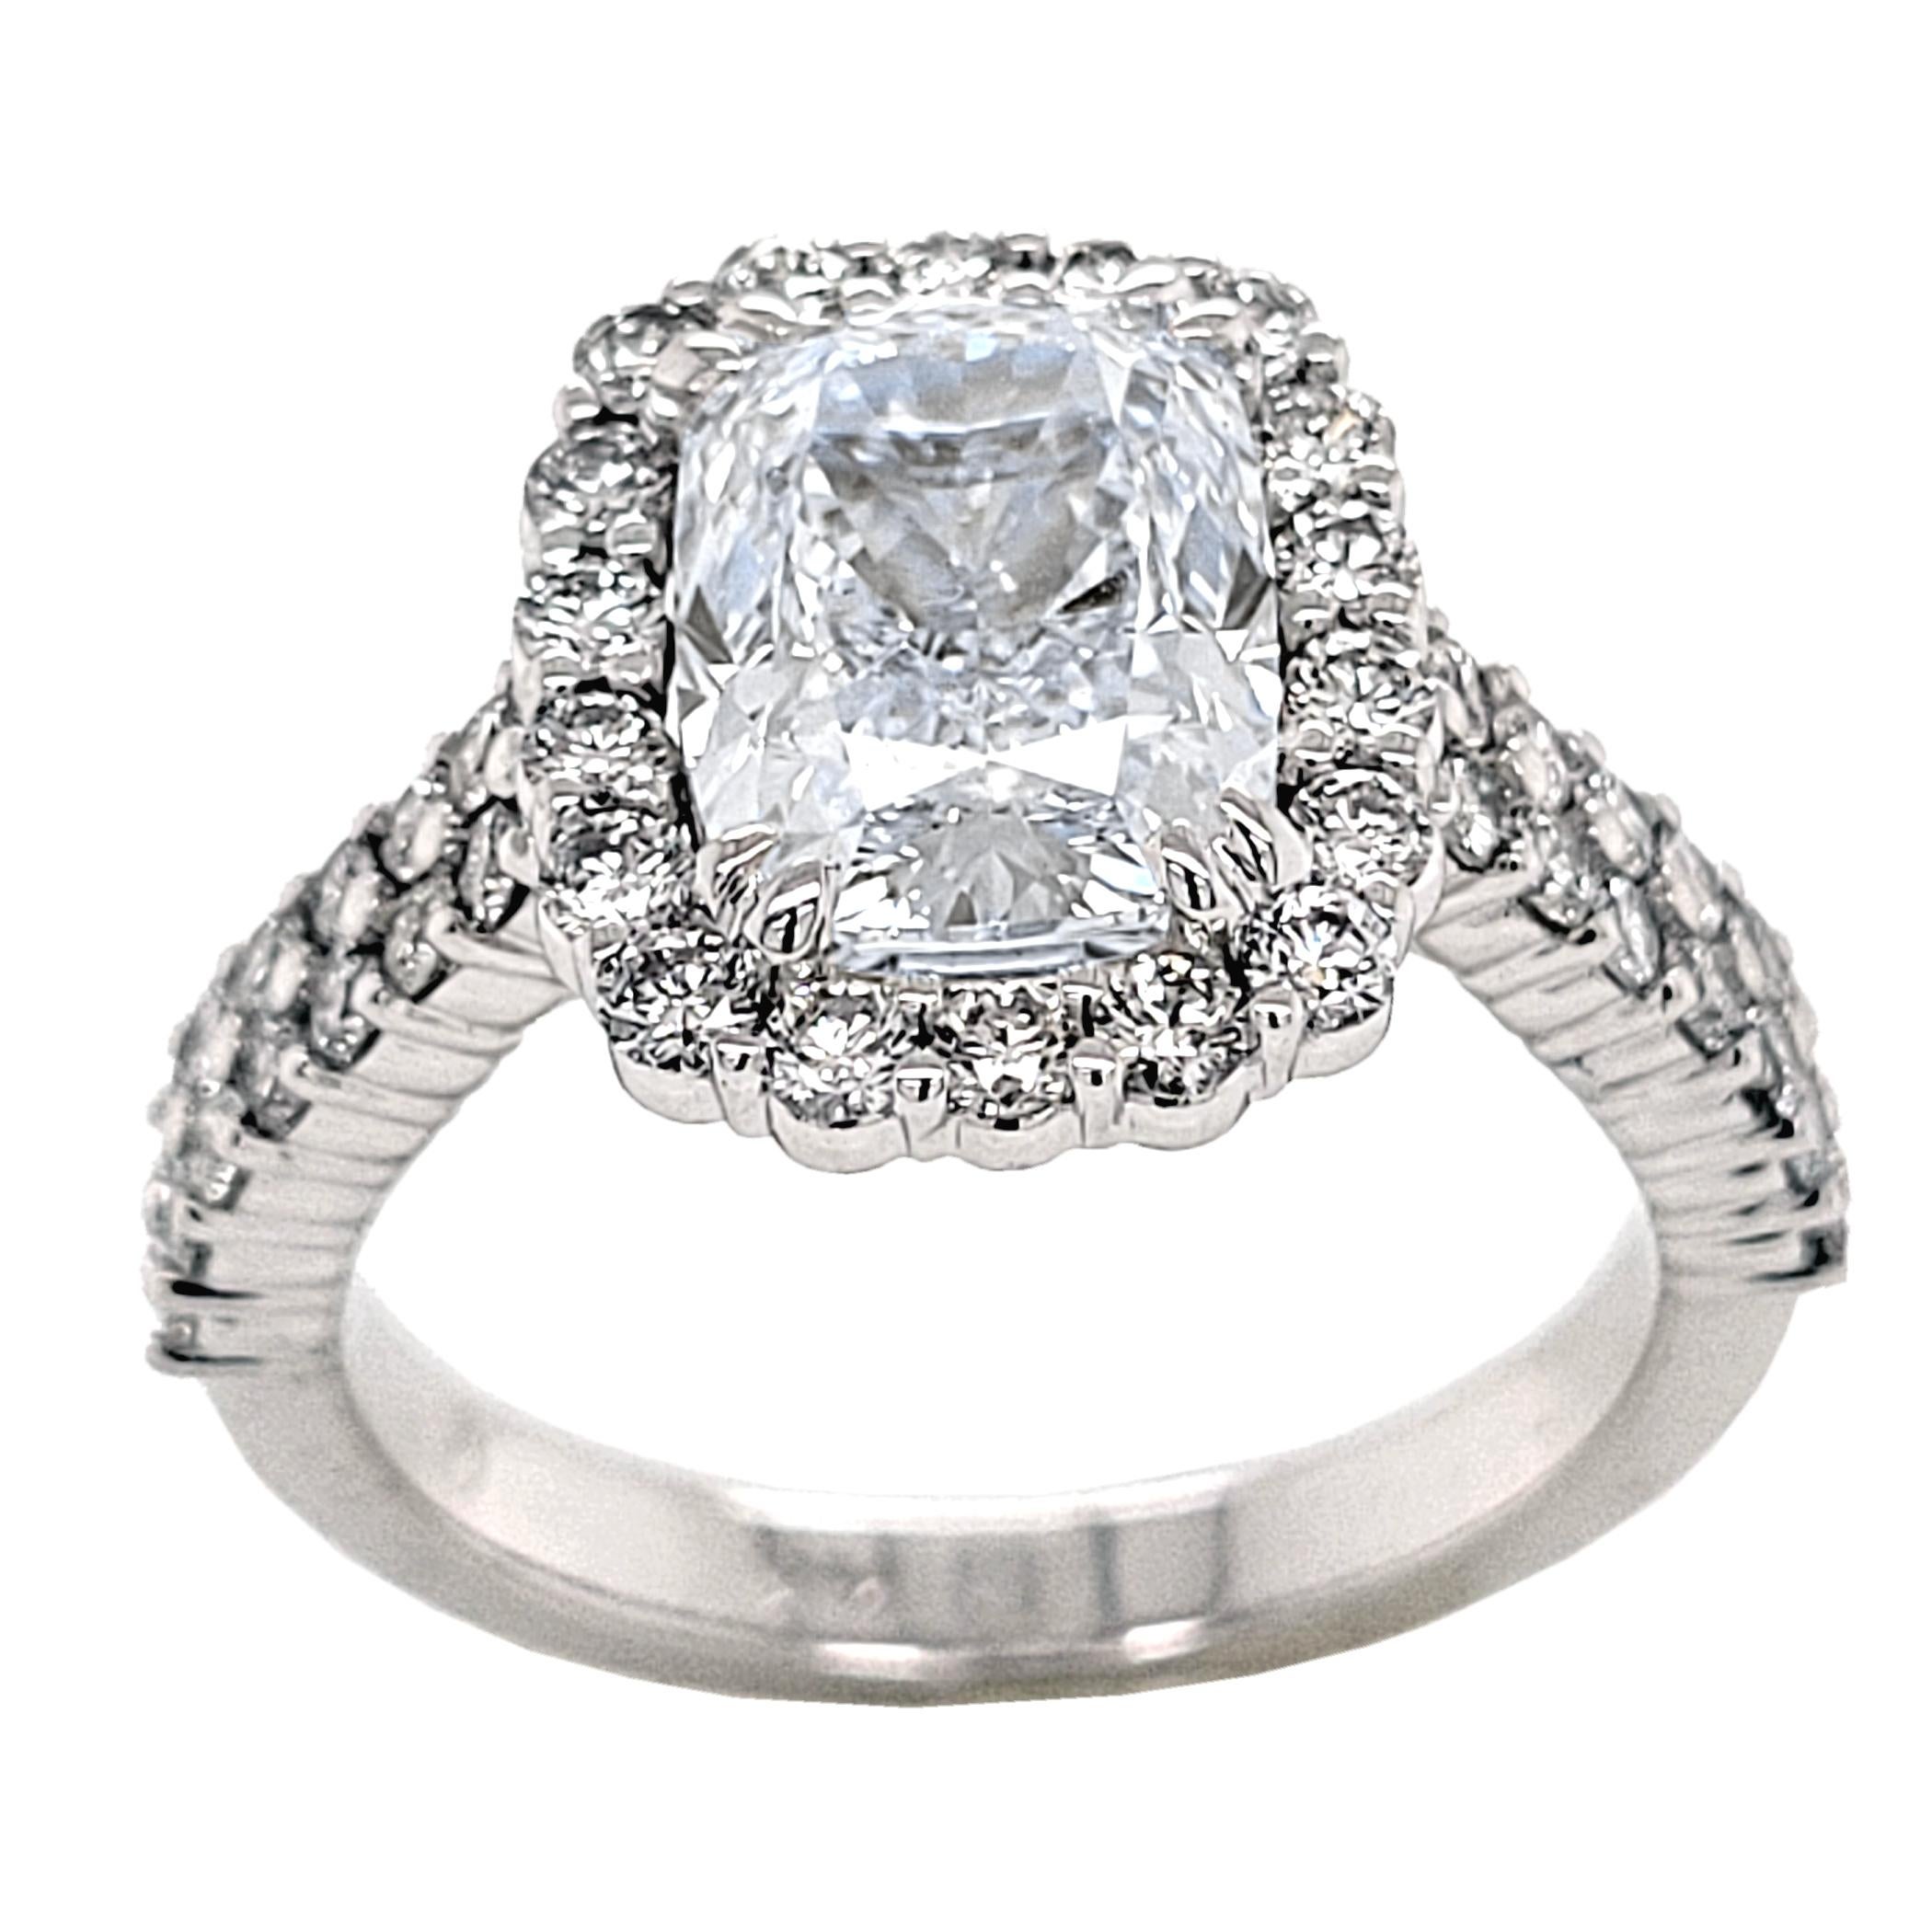 A very fine 3.02 Ct Rectangular Cushion Cut G/VS1 GIA certified center Diamond set in a fine 14k gold Pave set diamonds on the Halo and a double row pave Set on the shank. Total diamond weight of 0.98 Ct. on the side. 

Diamond specs:
Center stone: